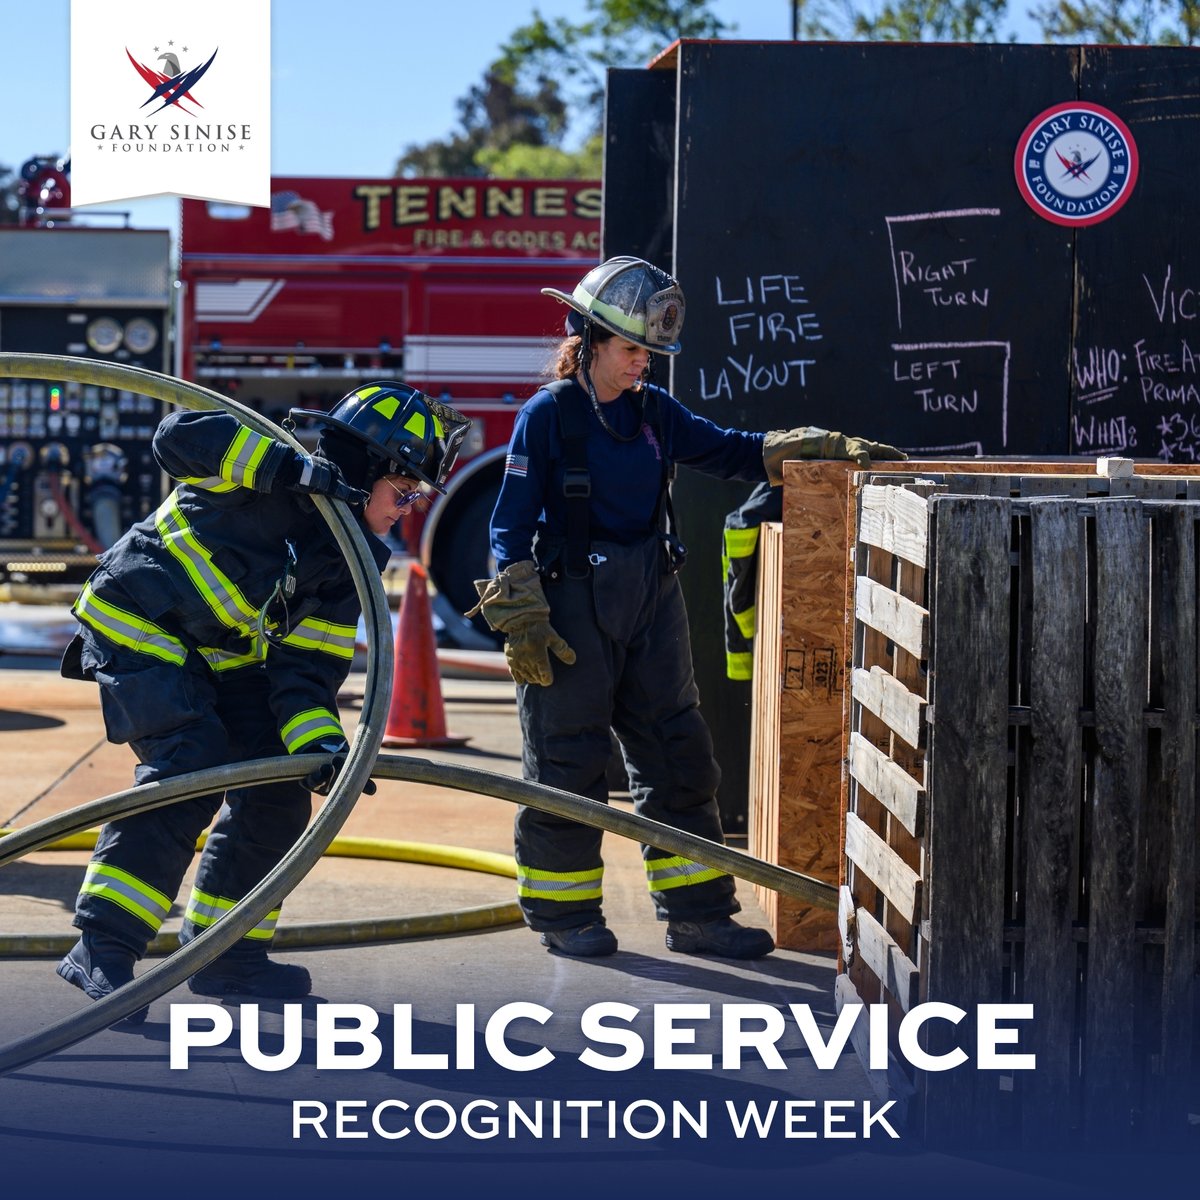 As we continue celebrating #PublicServiceRecognitionWeek, please join us as today as we honor our nation's incredible firefighters! We must never forget these local heroes who put their lives on the line daily to keep our communities safe.